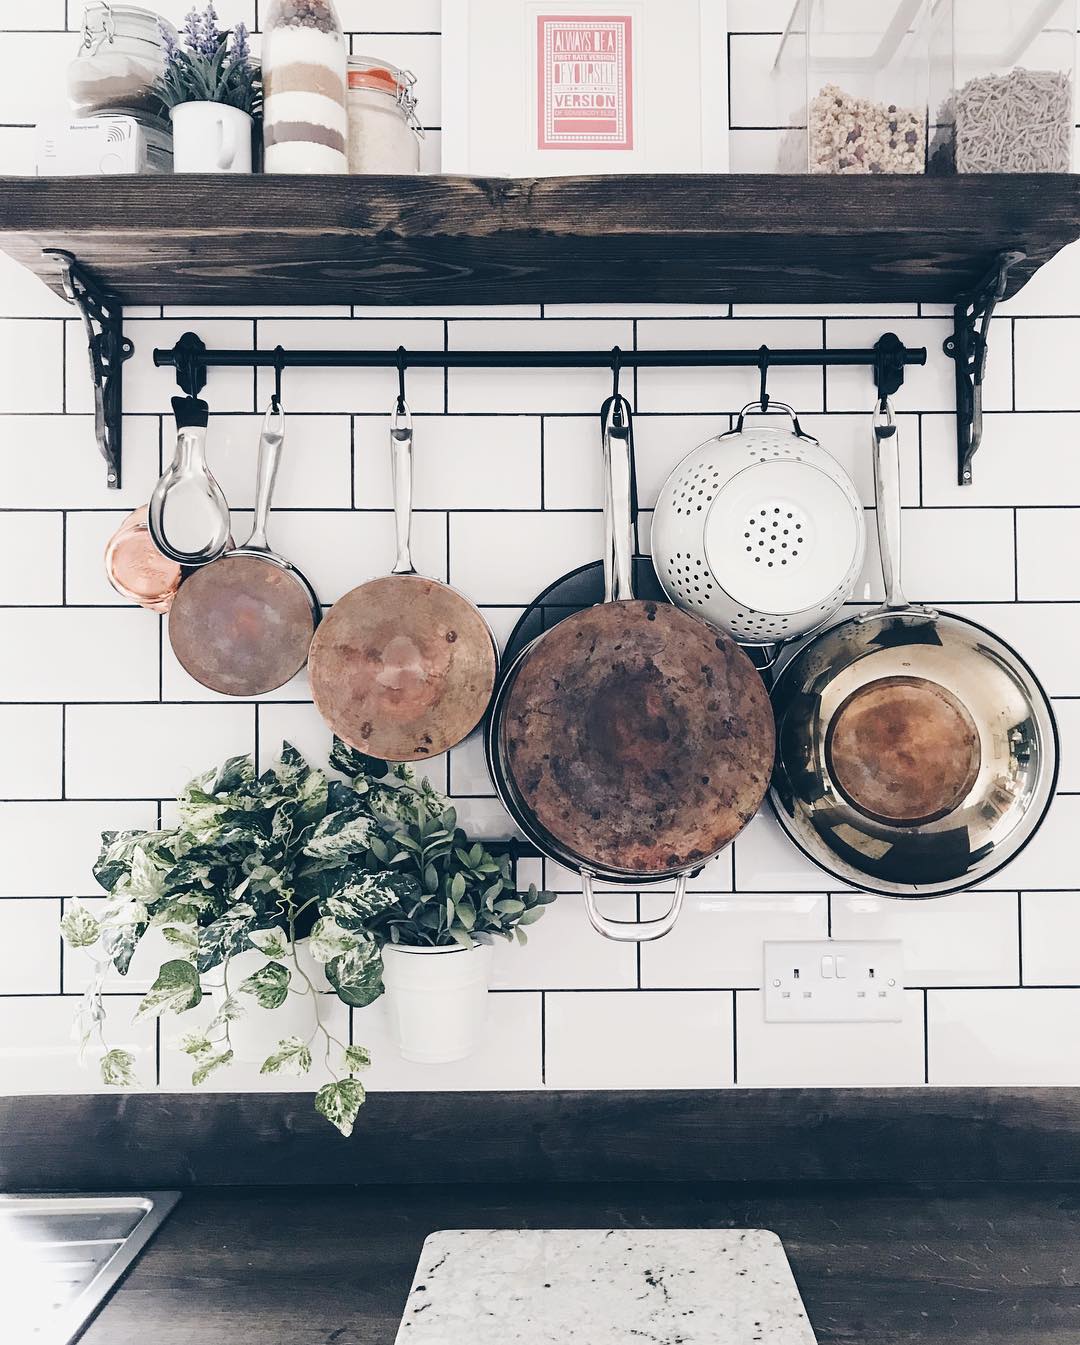 Hanging rack with pots and pans. Photo by Instagram user @world_of_heather